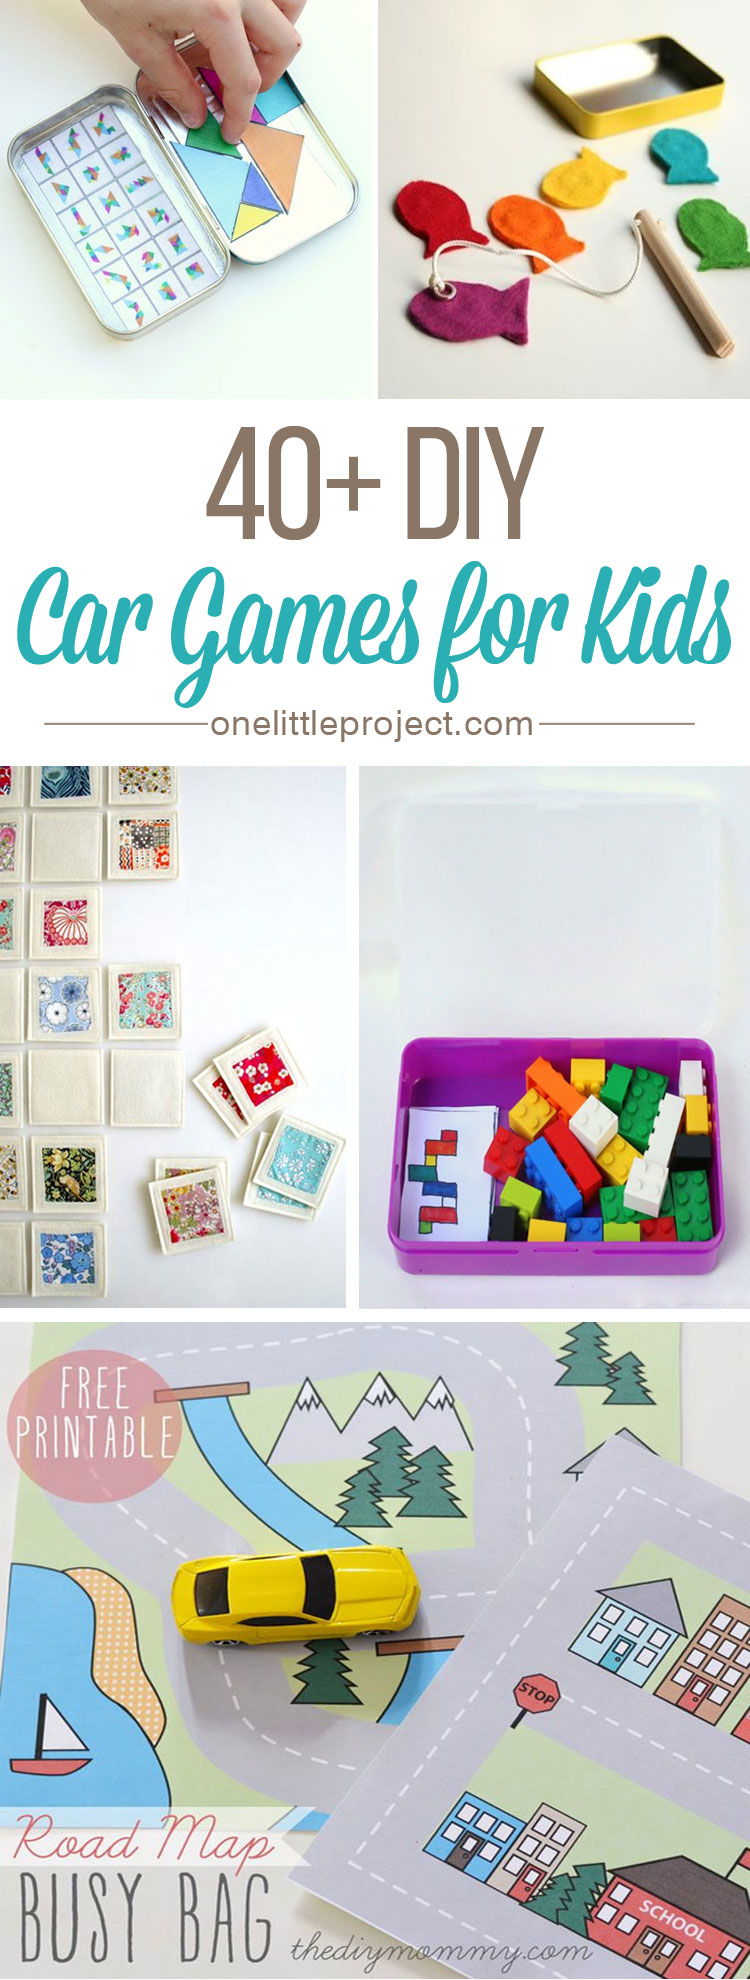 40+ DIY Car Games for Kids - This list has tons of ideas, tips and inspiration to keep your kids busy and quiet in the car or on a plane.